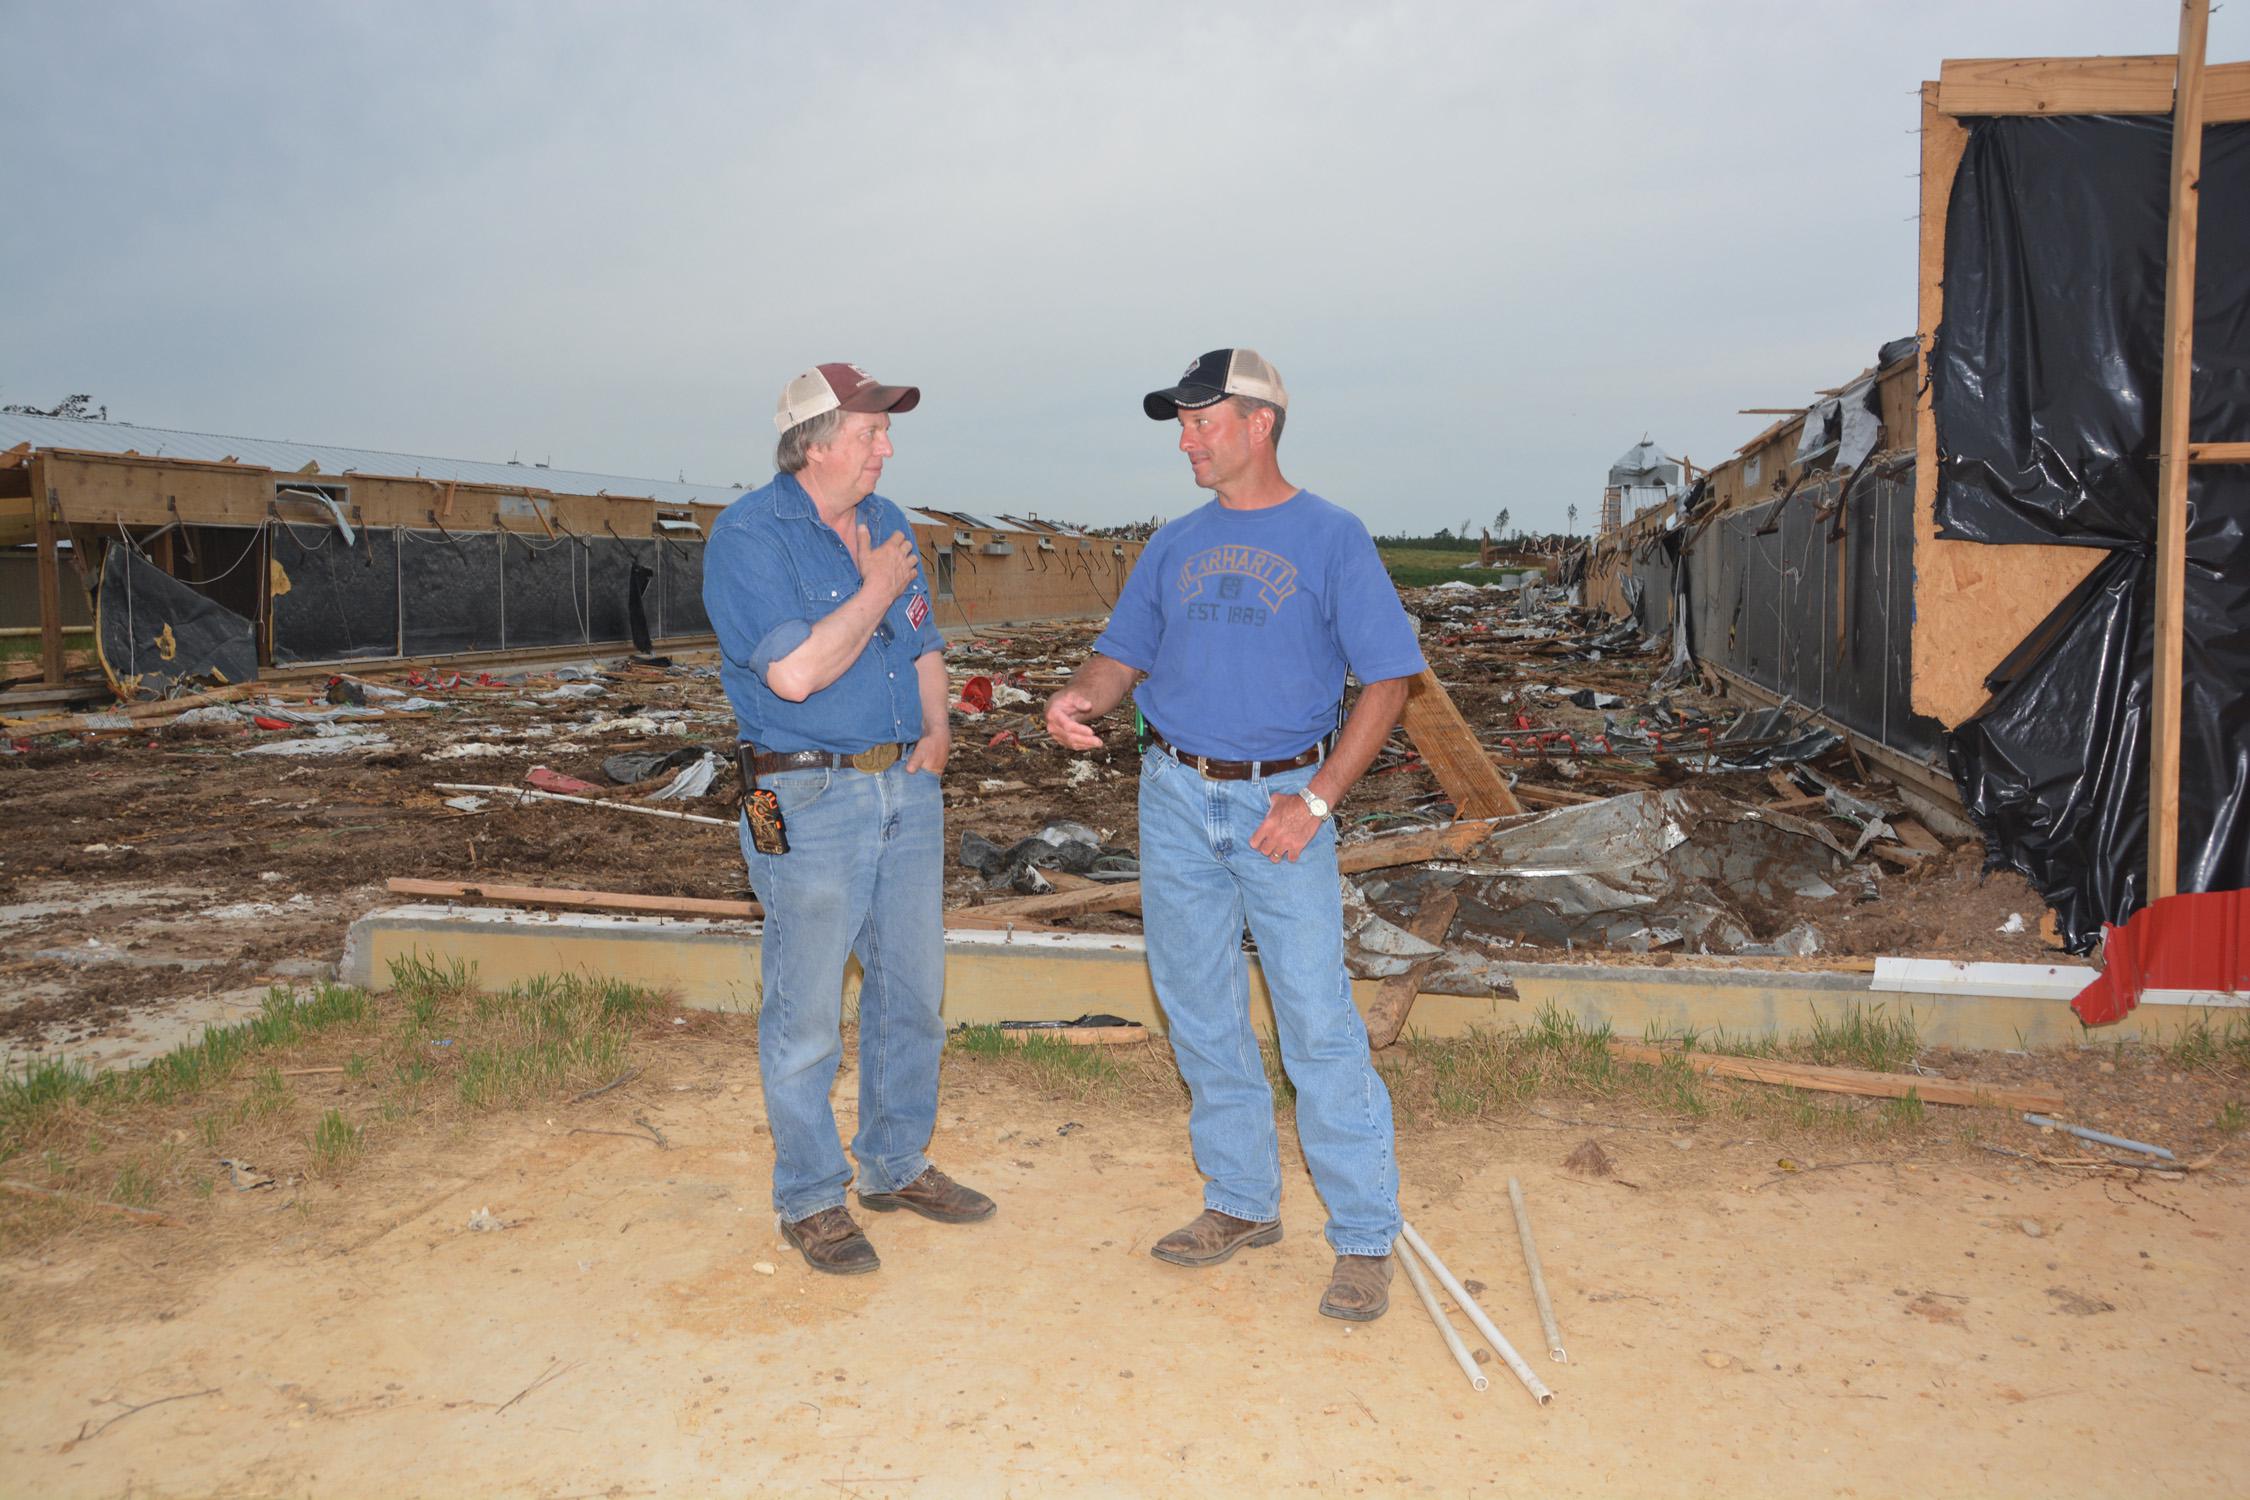 Mississippi State University Extension Service poultry specialist Tom Tabler, left, visits with Winston County poultry grower Tim Hobby on May 8, 2014. Hobby lost 10 broiler houses in the April 28 tornado. (Photo by MSU Ag Communications/Linda Breazeale)